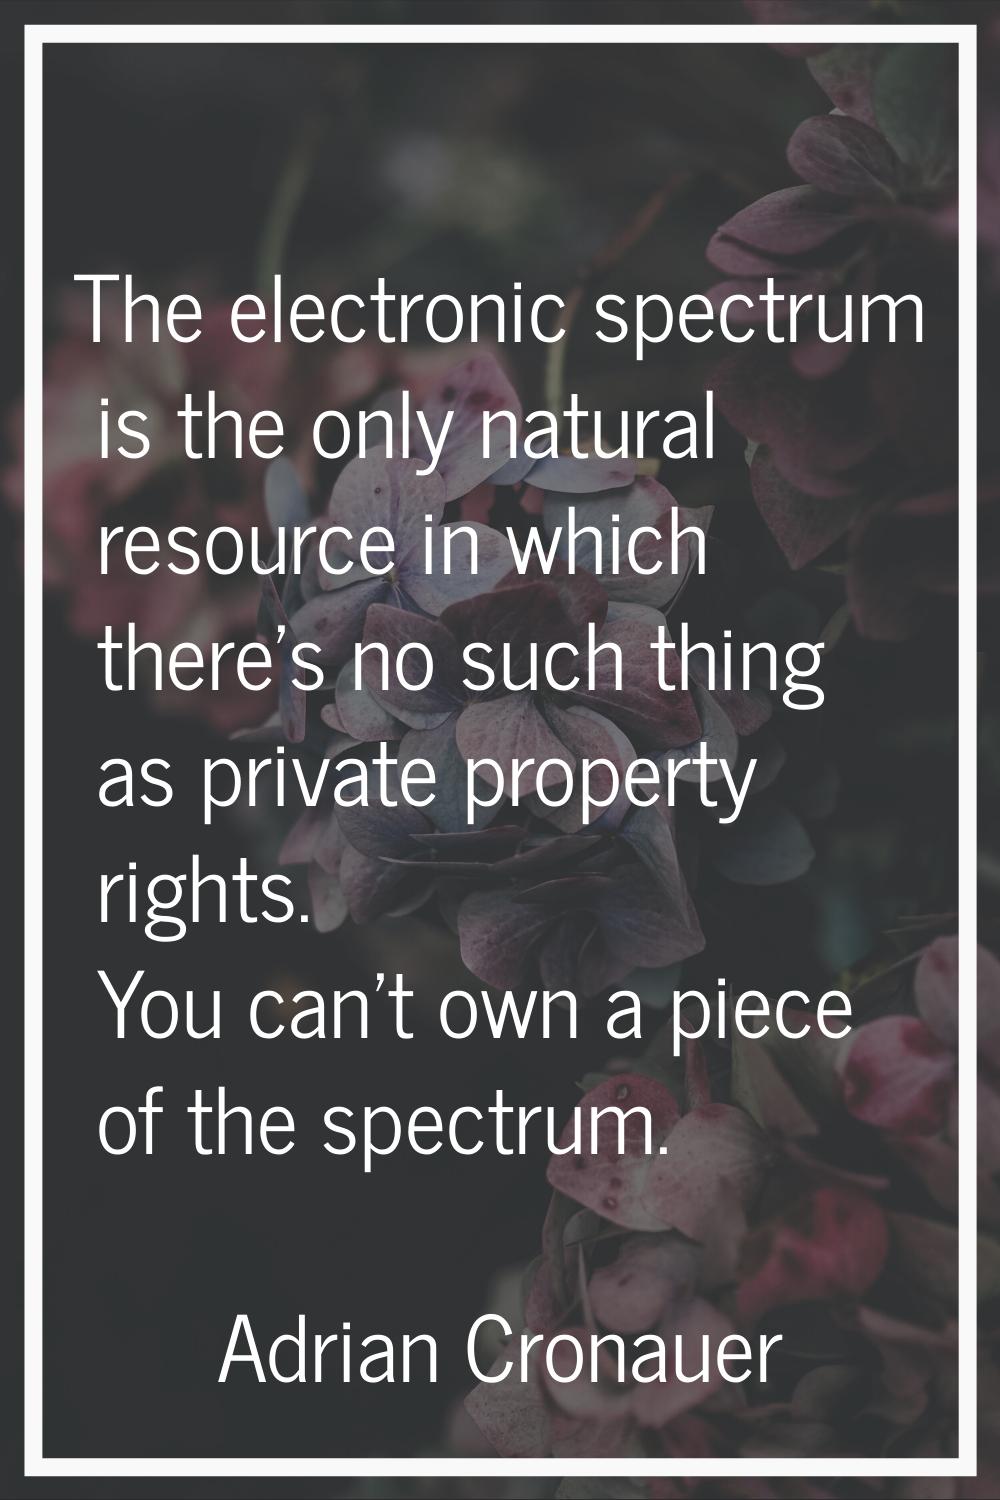 The electronic spectrum is the only natural resource in which there's no such thing as private prop